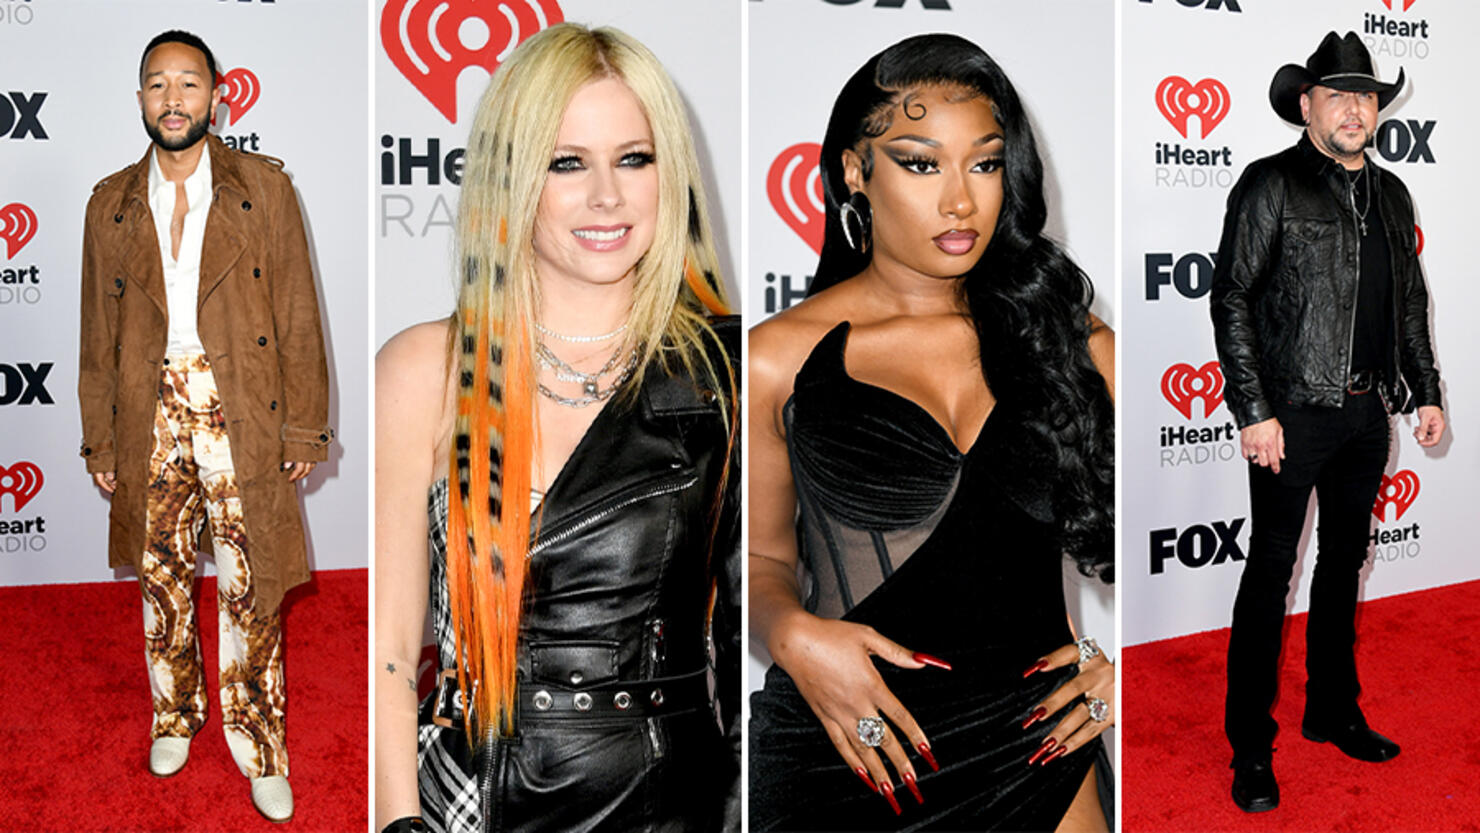 Every EyePopping iHeartRadio Music Awards Red Carpet Look You Need To